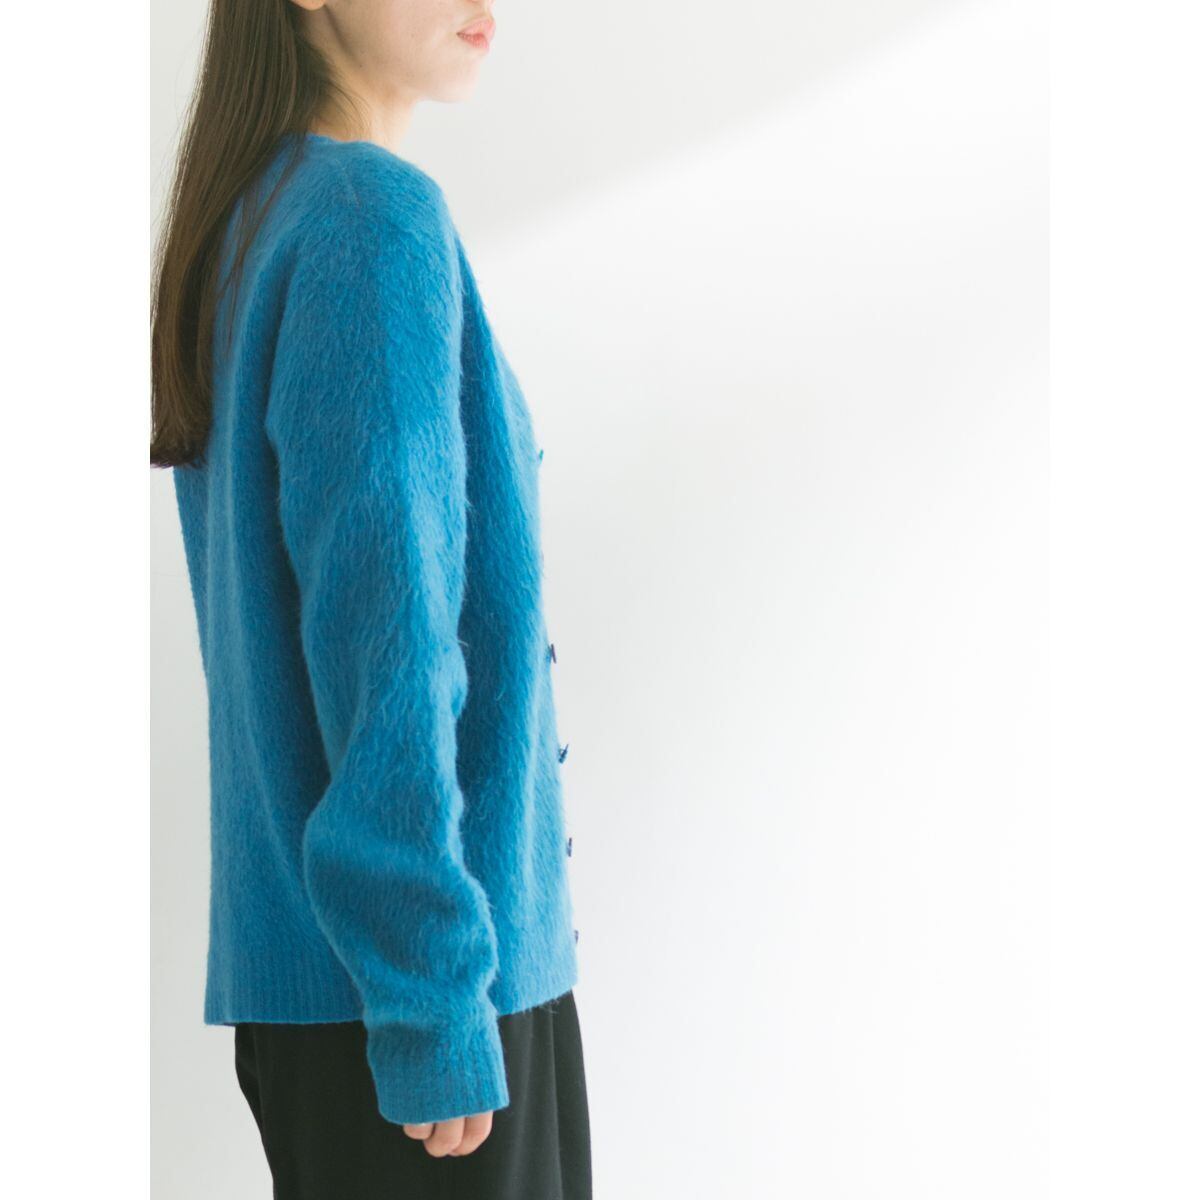 70s vintage knit mohair ヴィンテージ モヘア